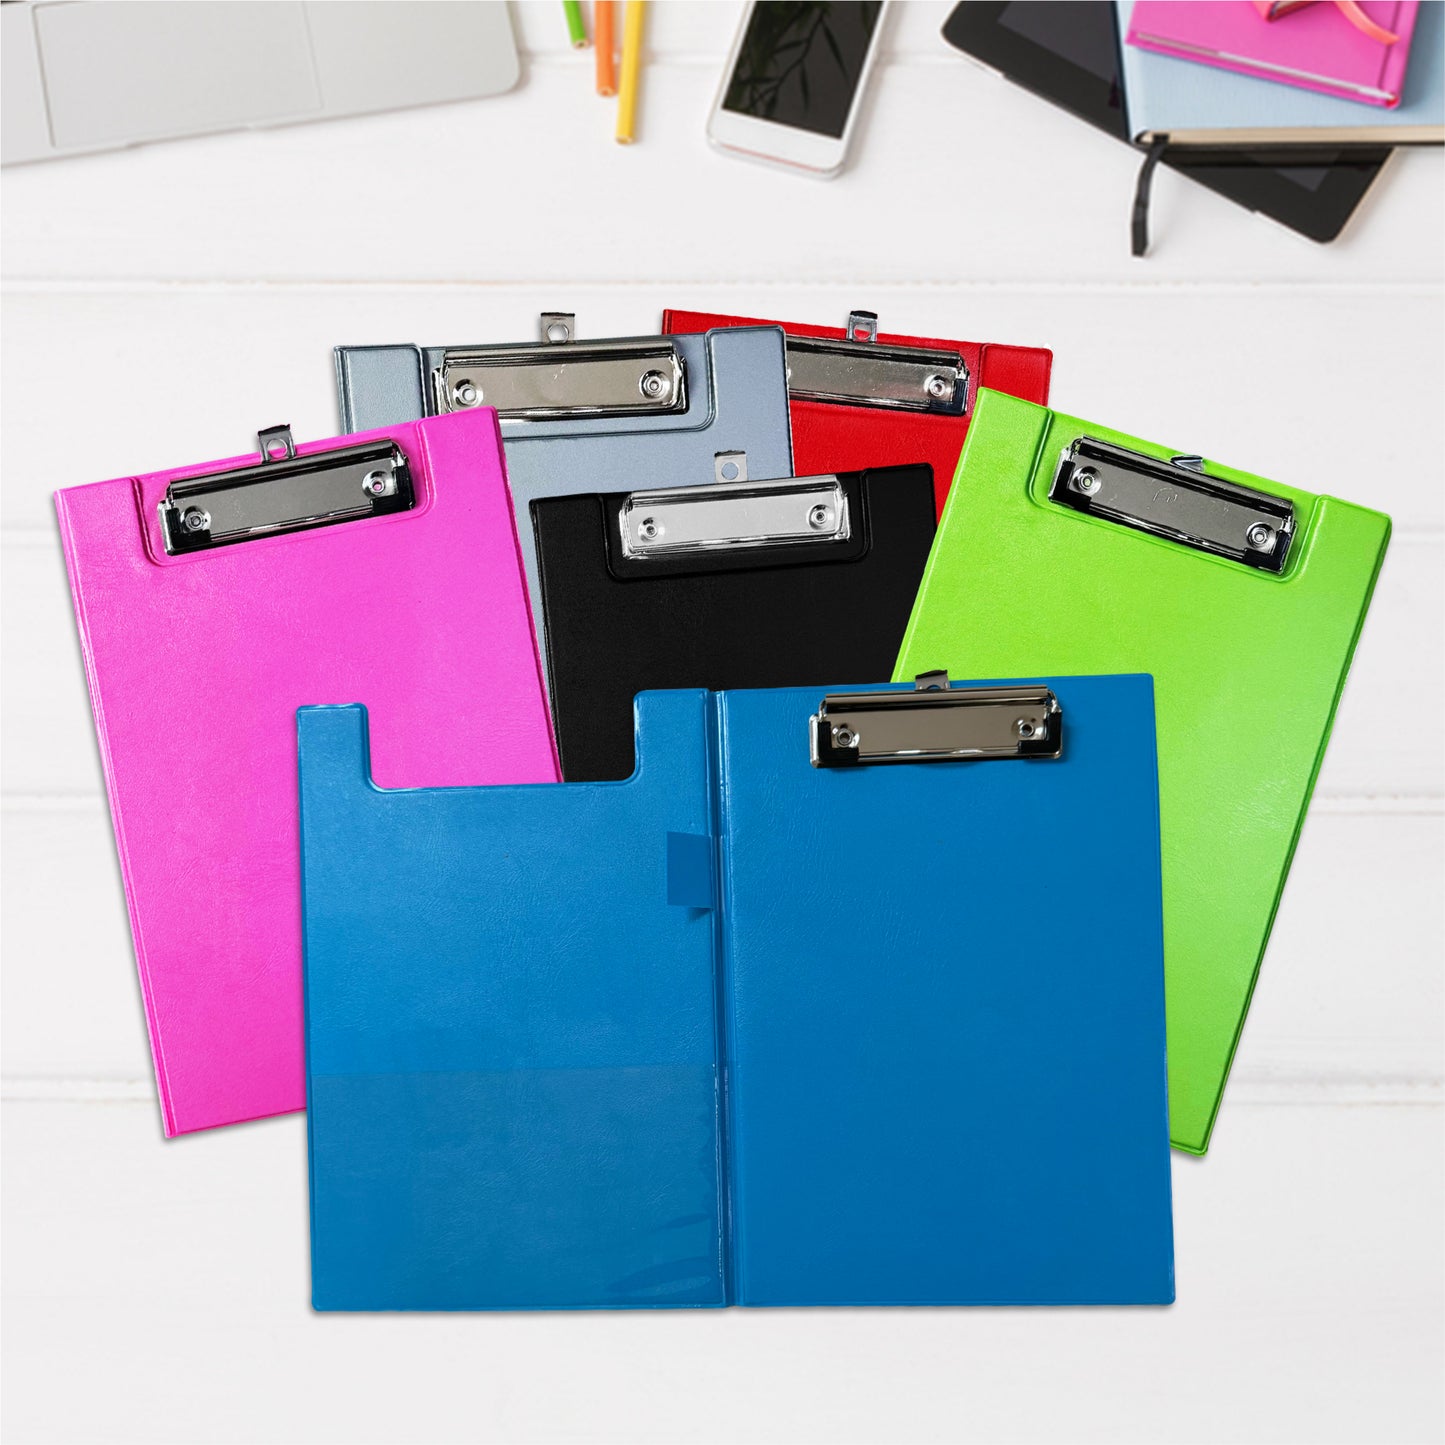 Pack of 6 A5 Blue Foldover Clipboards